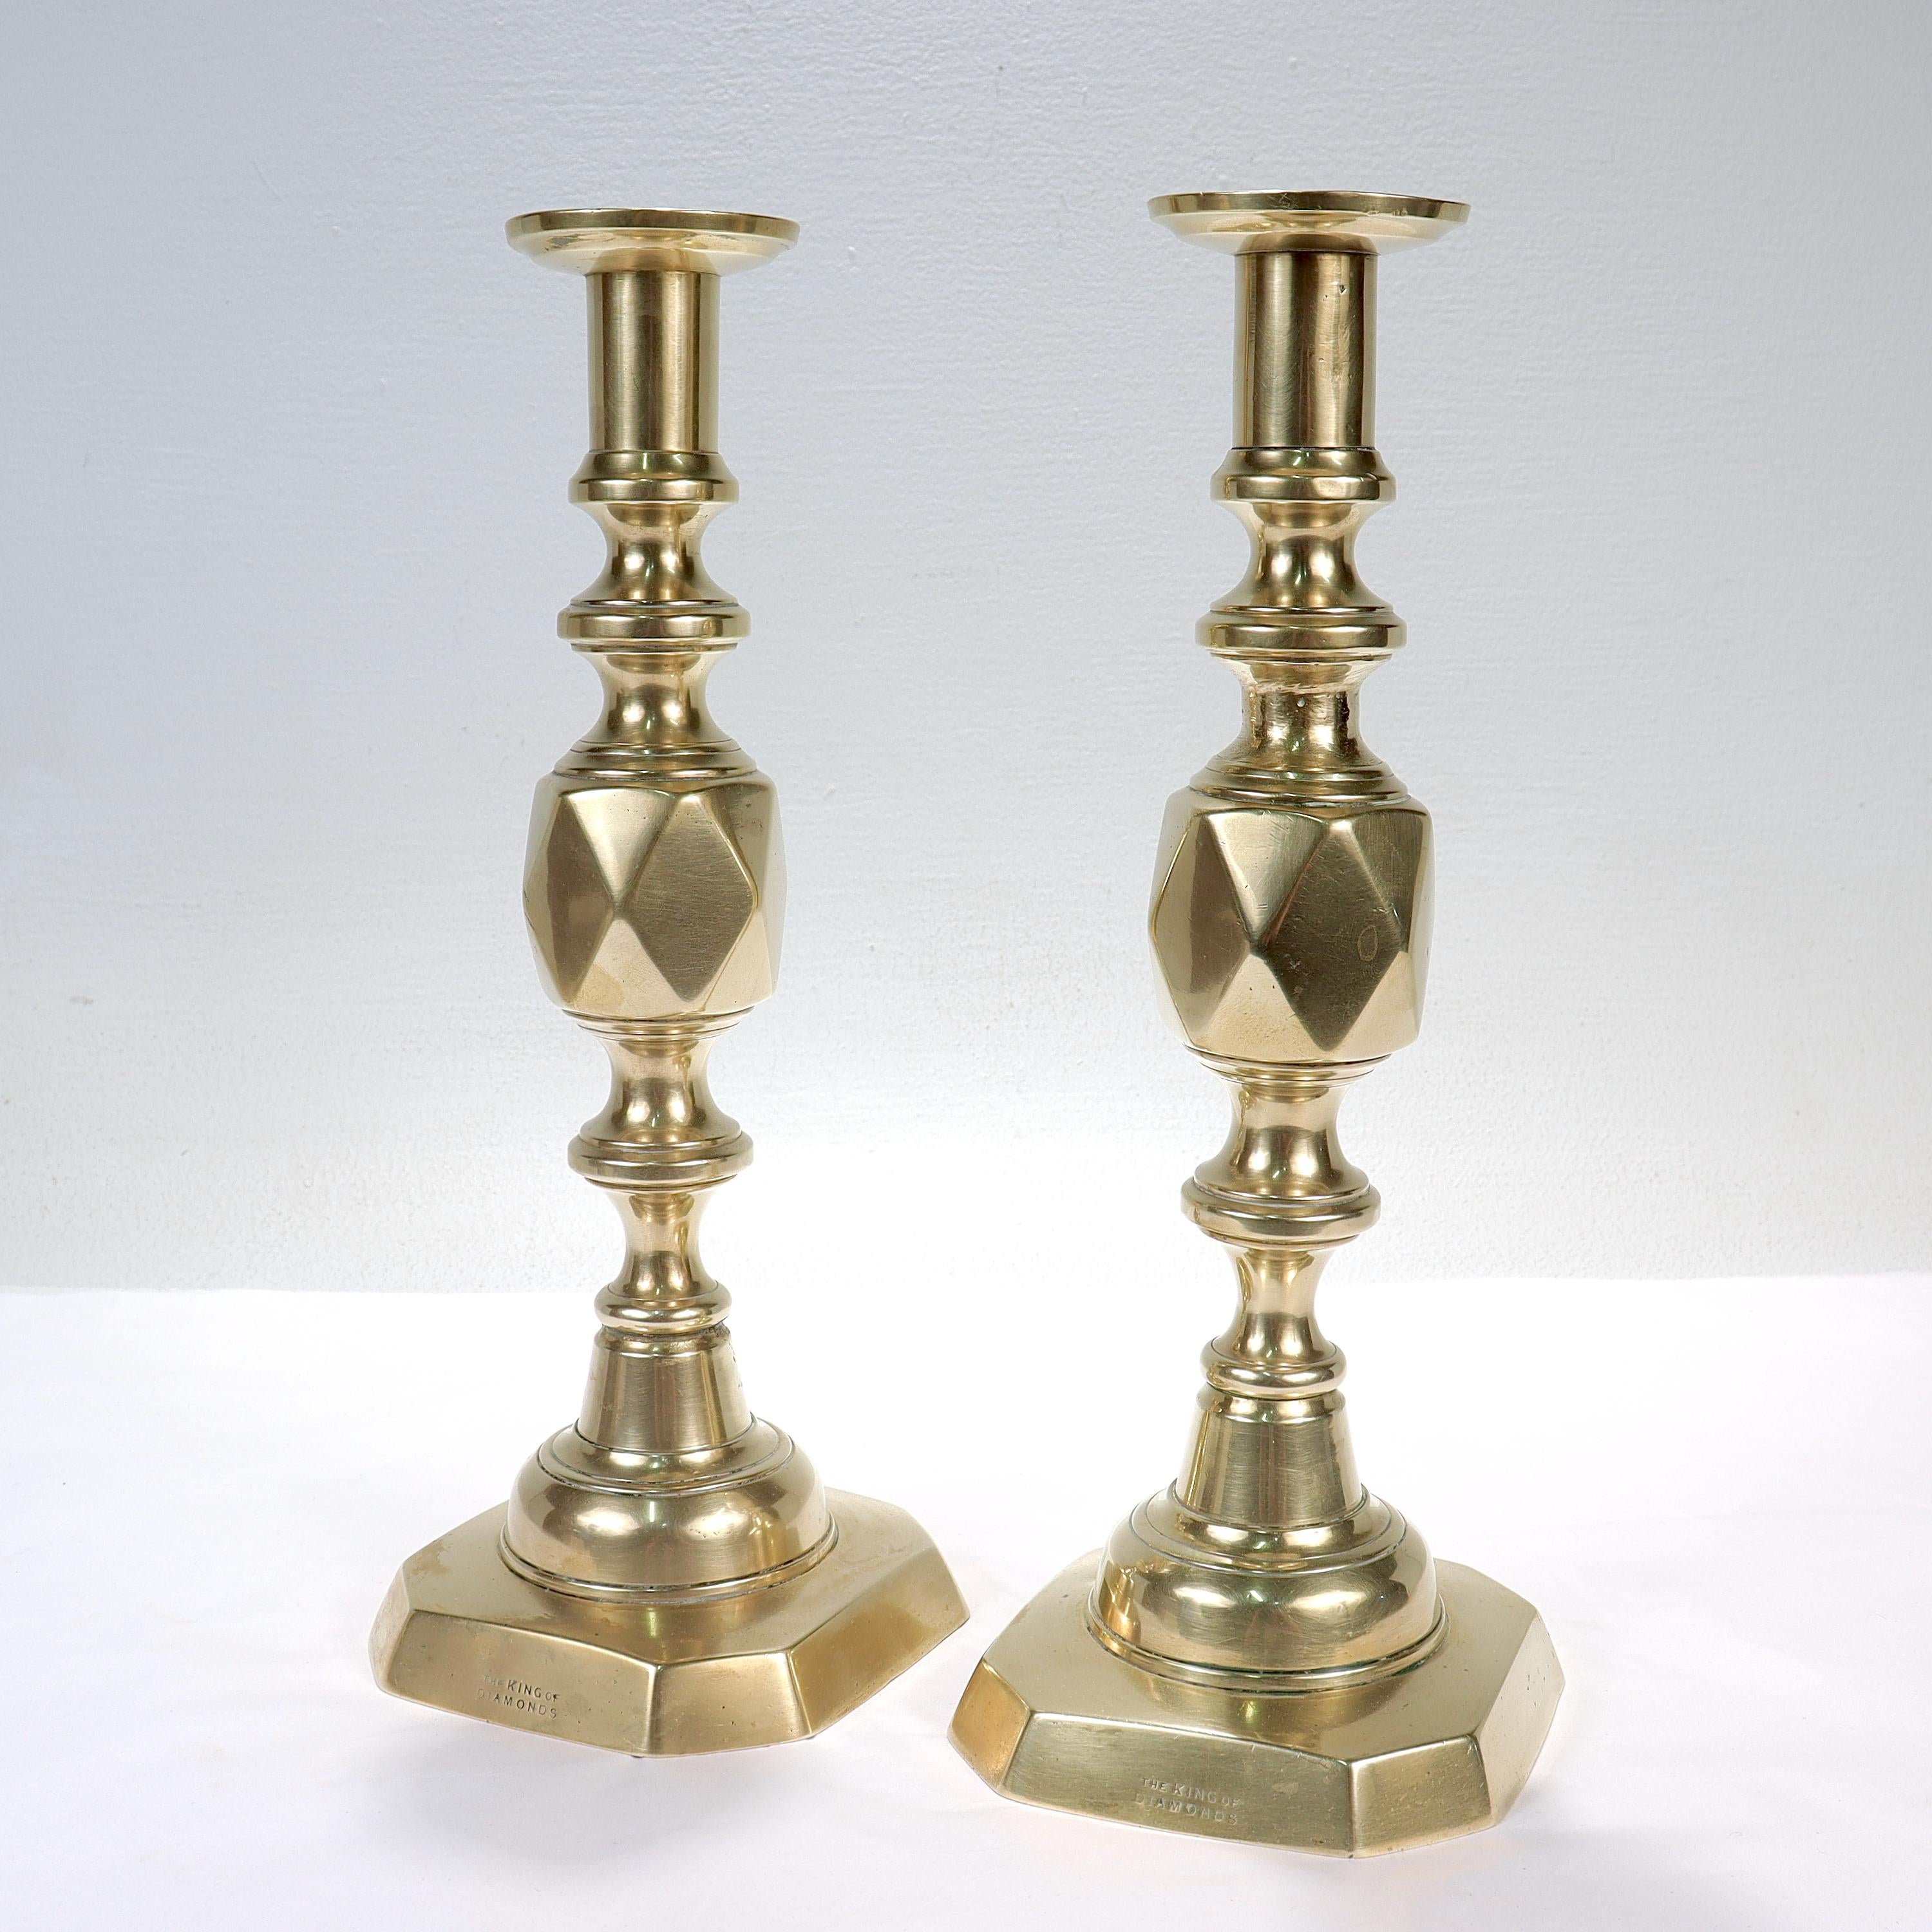 A pair of fine antique King of Diamonds English brass candlesticks.

James Clews & Sons of Birmingham designed the Diamond series of candlesticks to celebrate the Diamond Jubilee of Queen Victoria in 1897. Entitled the ‘Ace of Diamonds', ‘King of